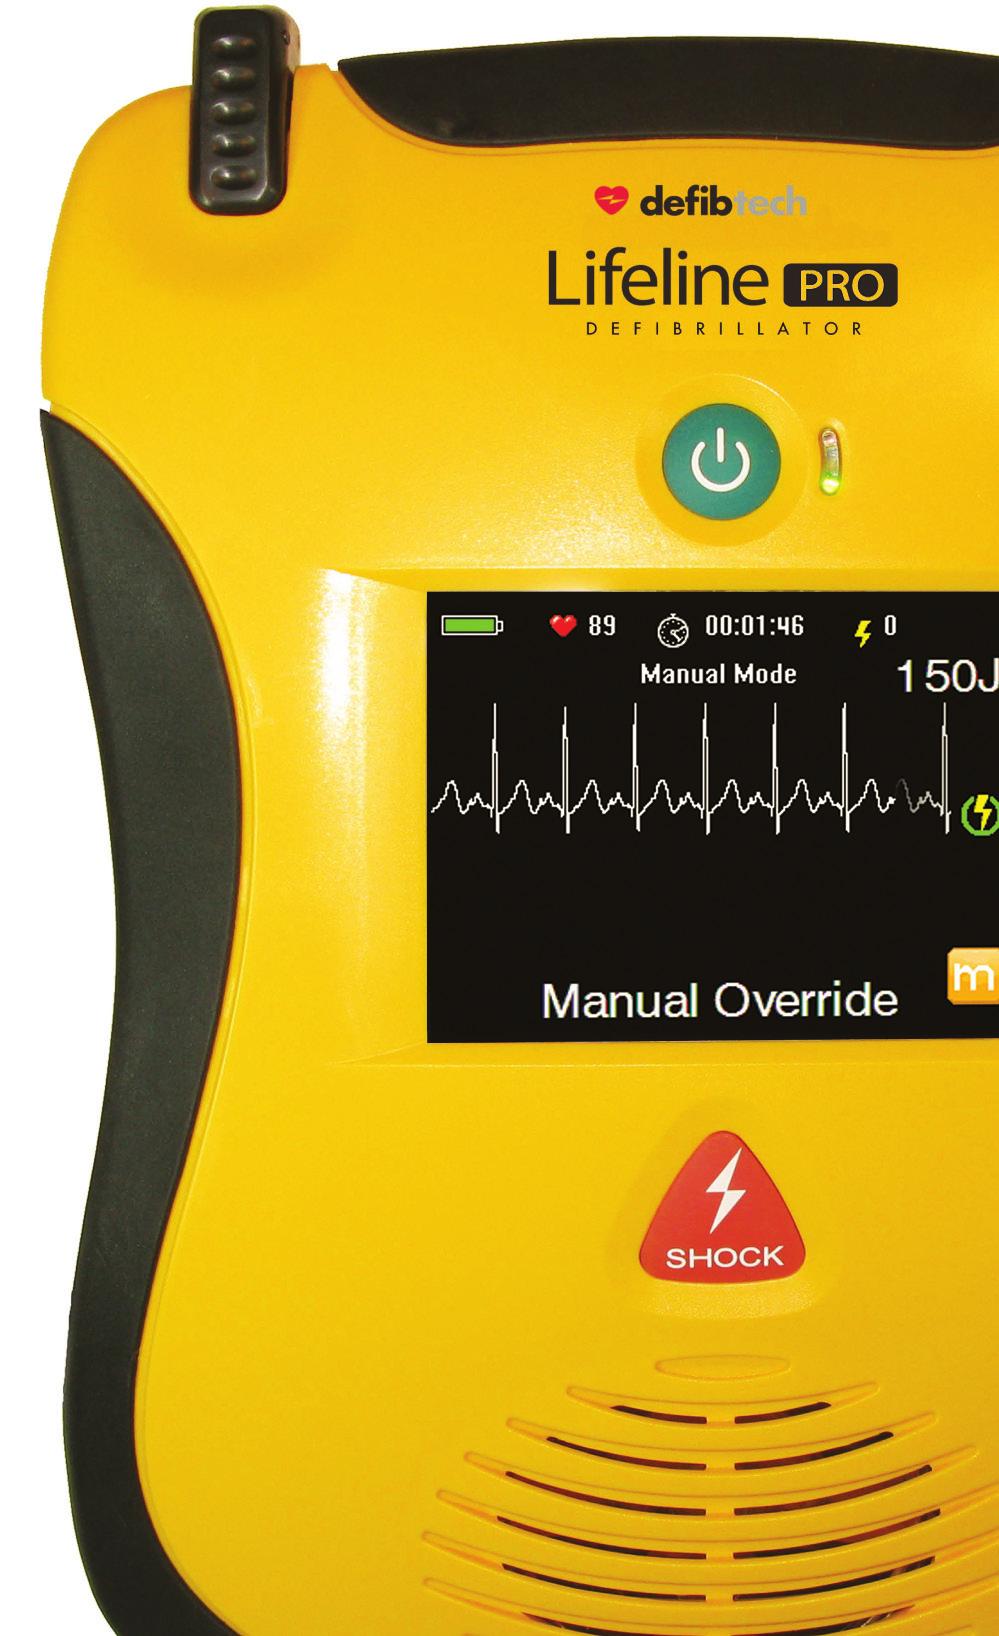 Is Your Device Ready for Rescue? The One Touch Status Screen Lets You Know When sudden cardiac arrest strikes, there is no time to lose. You need to be sure that your AED is ready for rescue.